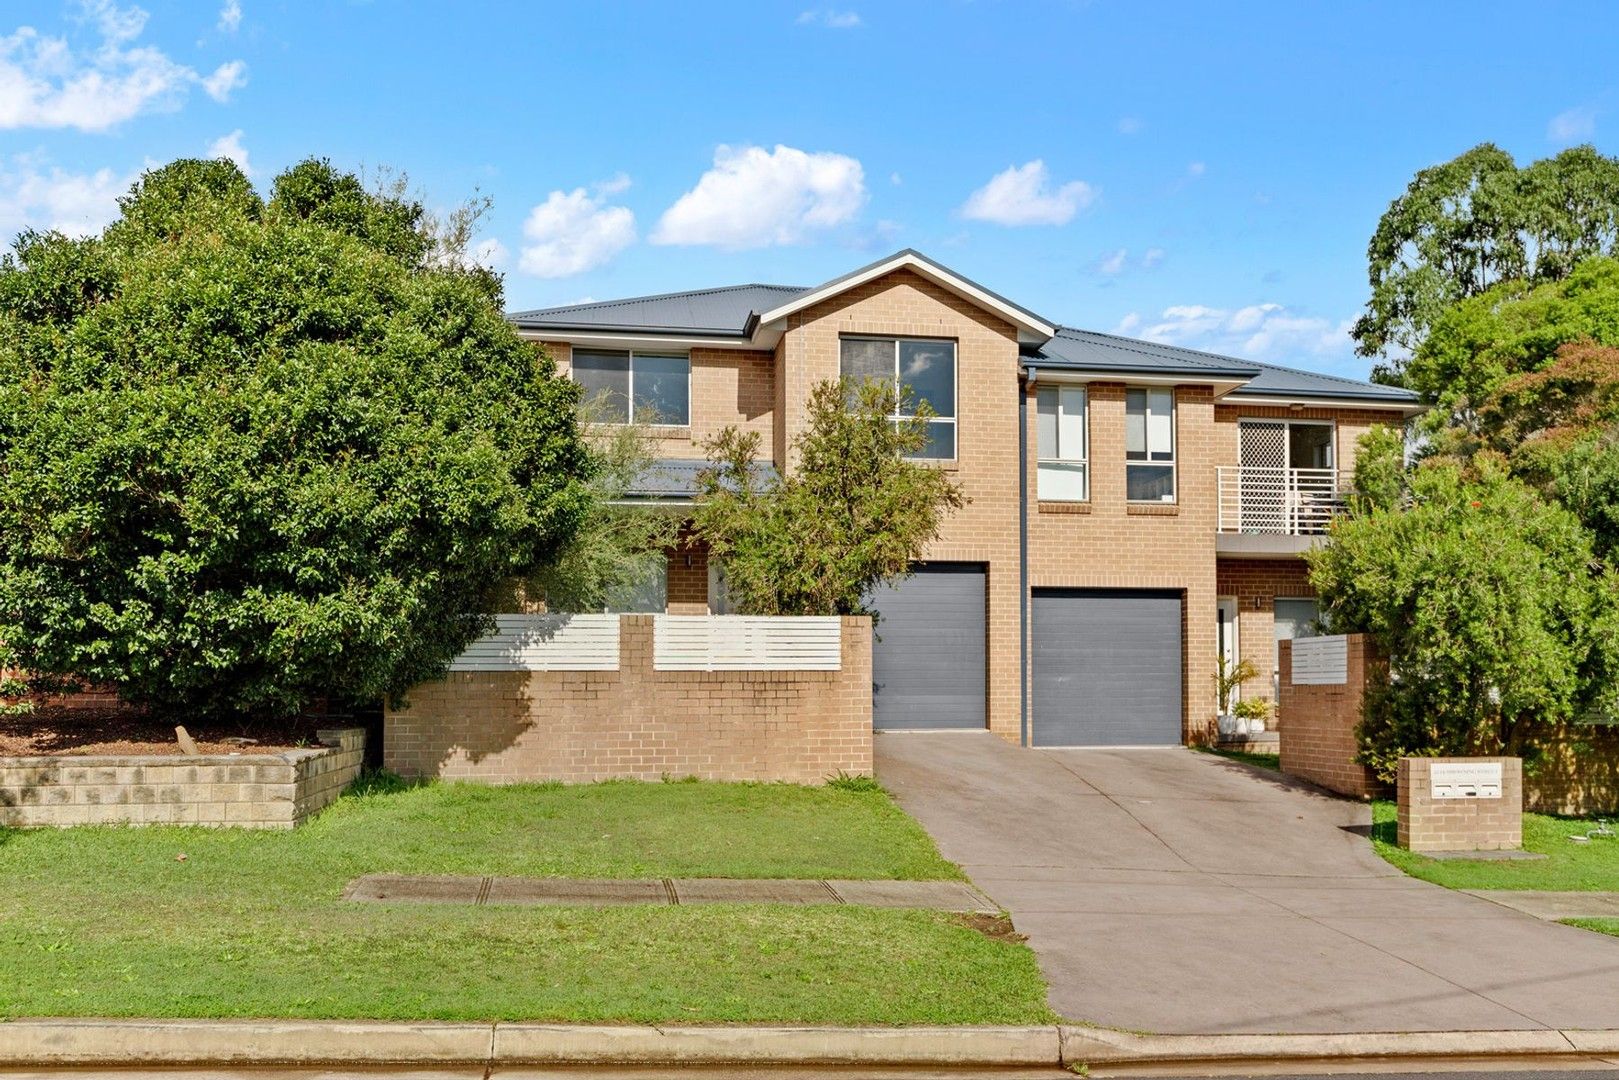 1/12-14 Browning Street, East Hills NSW 2213, Image 0